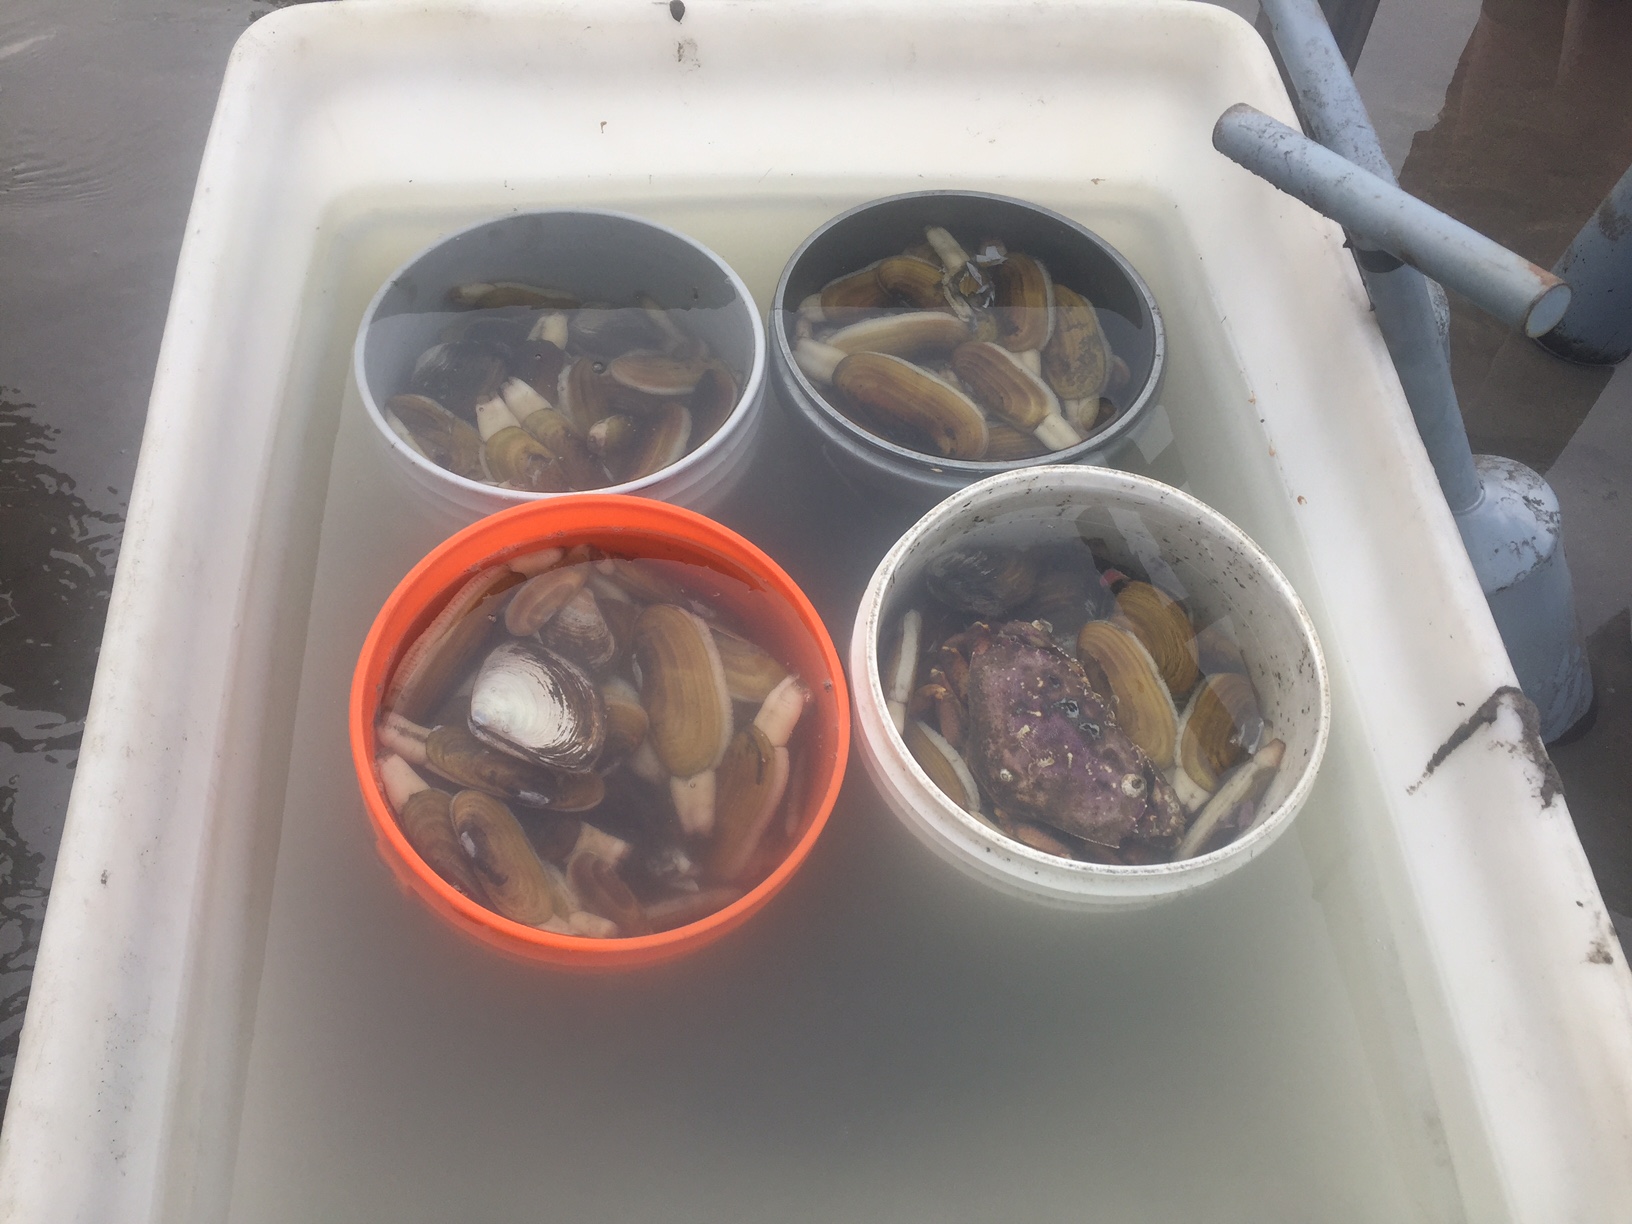 Clams in buckets